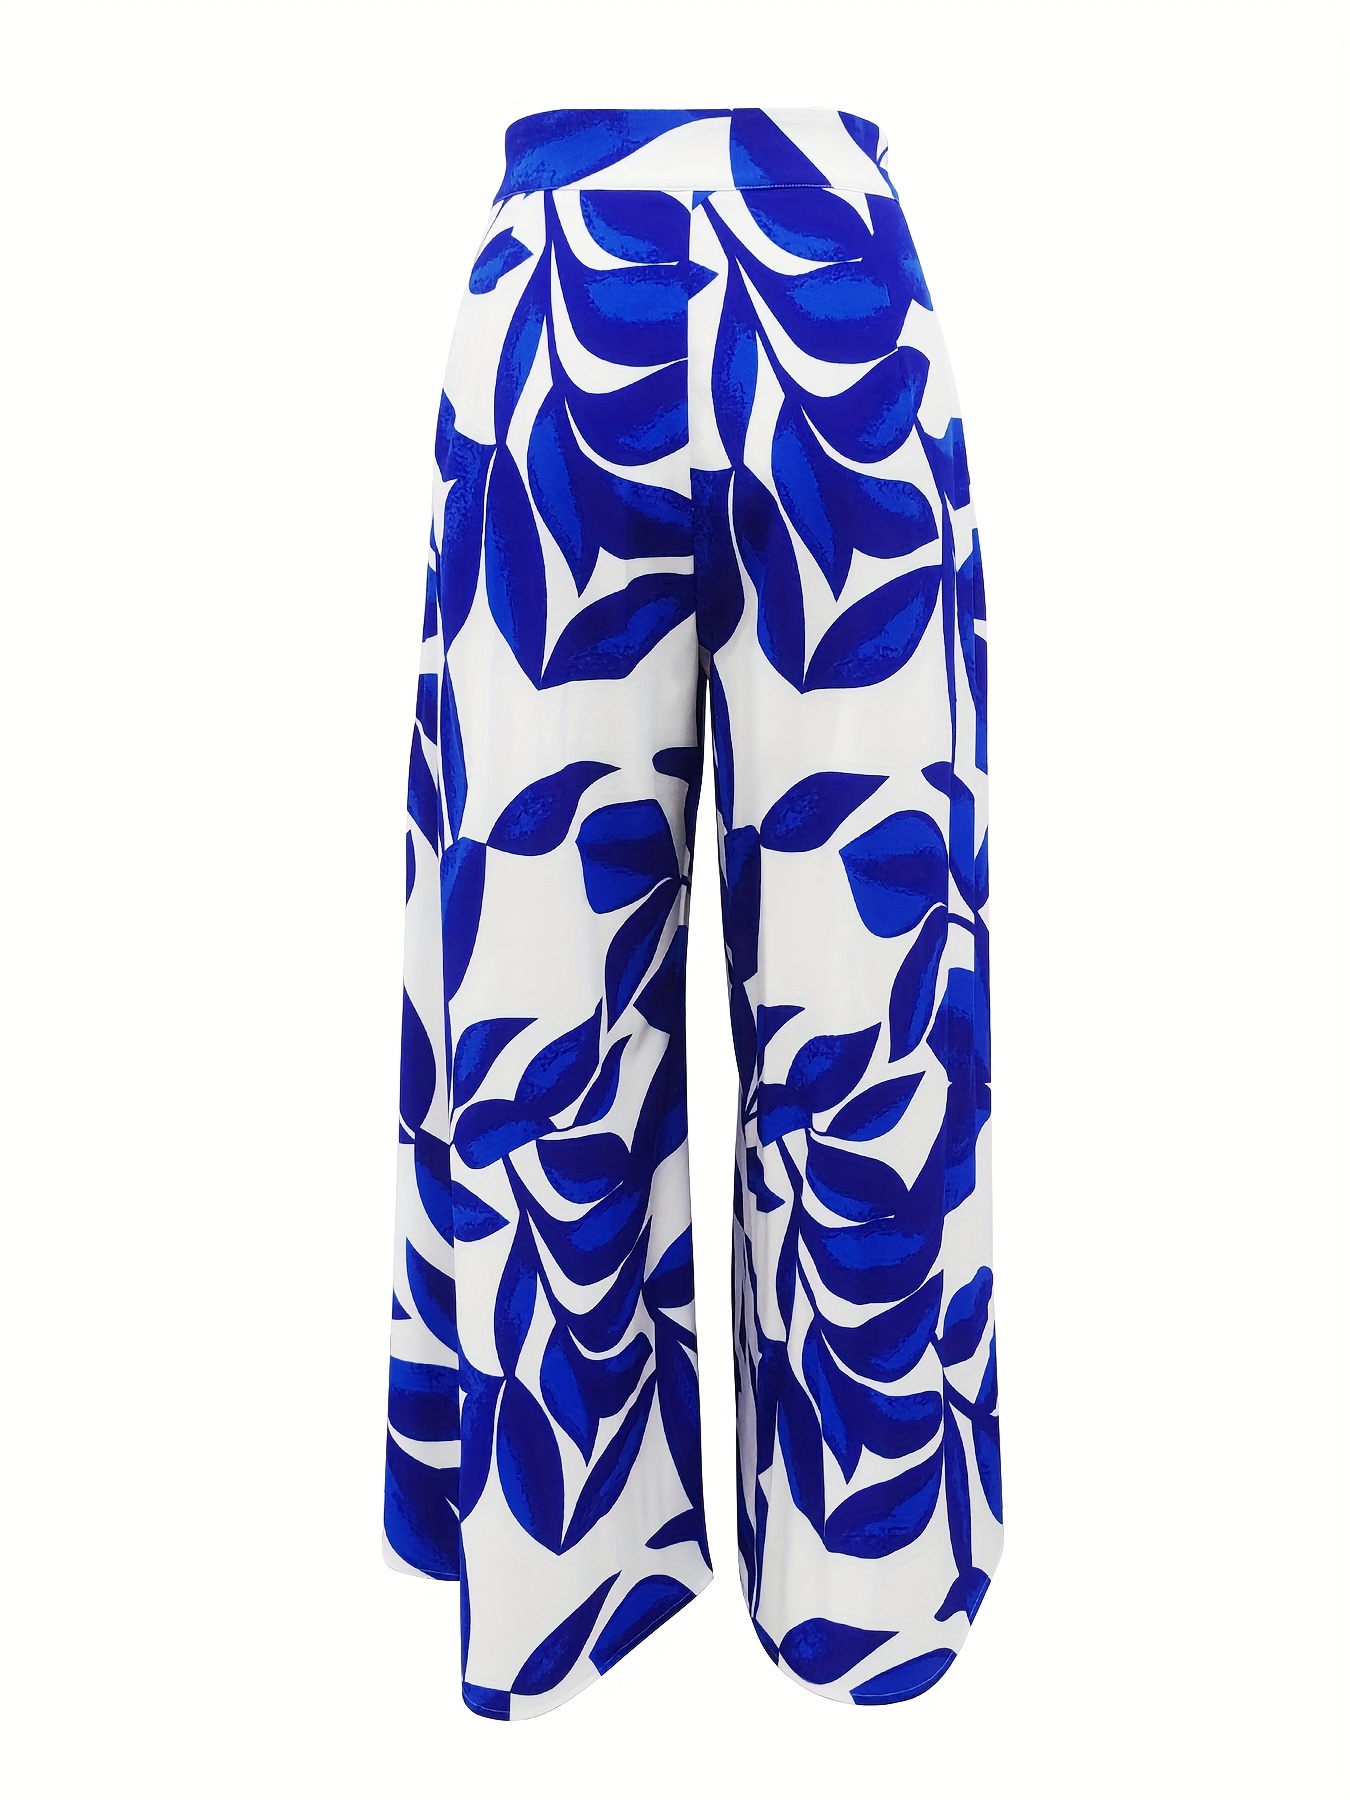 Leaf Print Wide Leg Pants, Casual High Waist Pants For Spring & Summer,  Women's Clothing